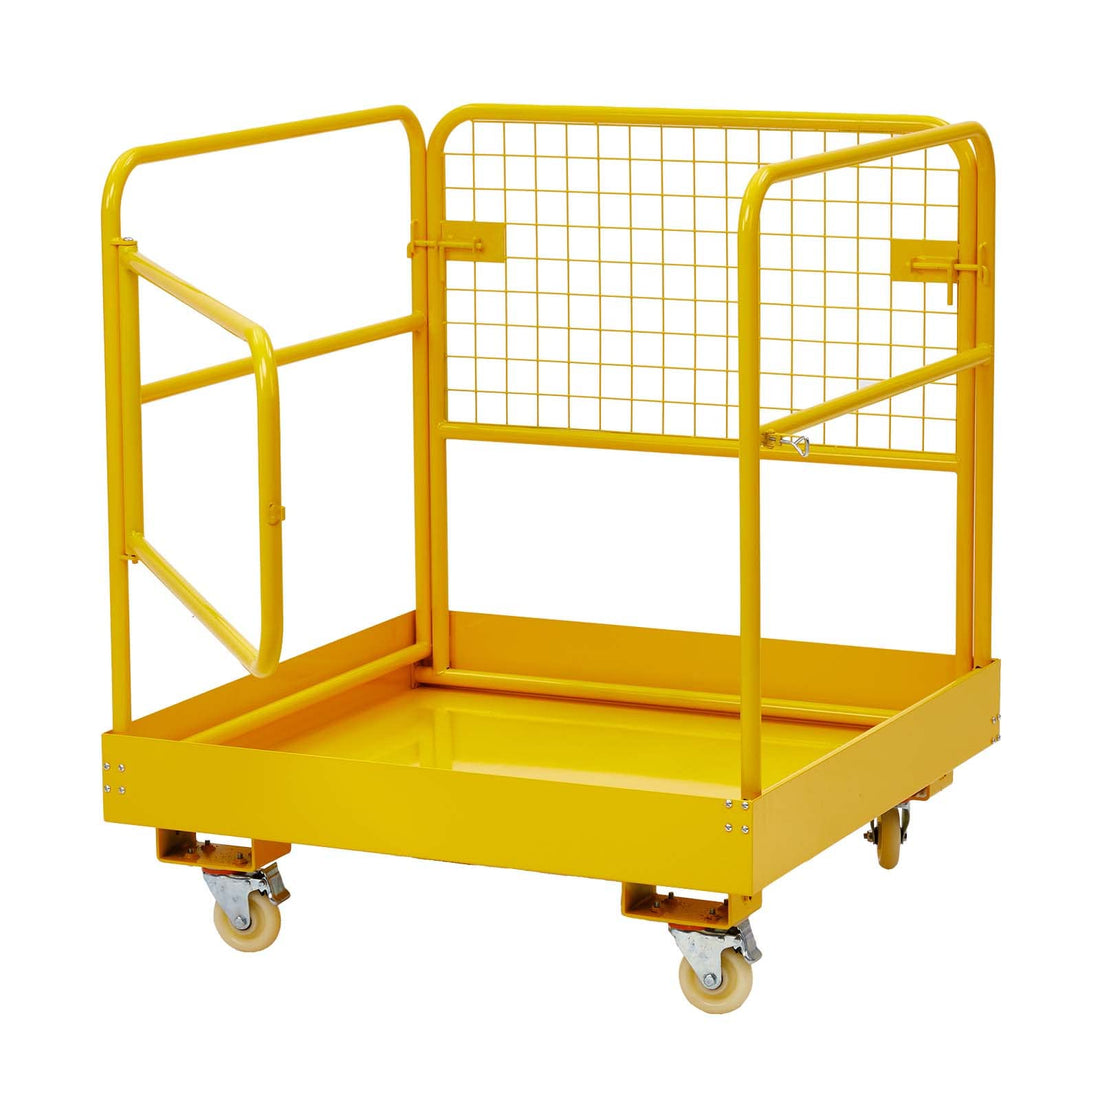 Forklift Safety Cage 36x36 Inch Heavy Duty Collapsible Forklift Yellow